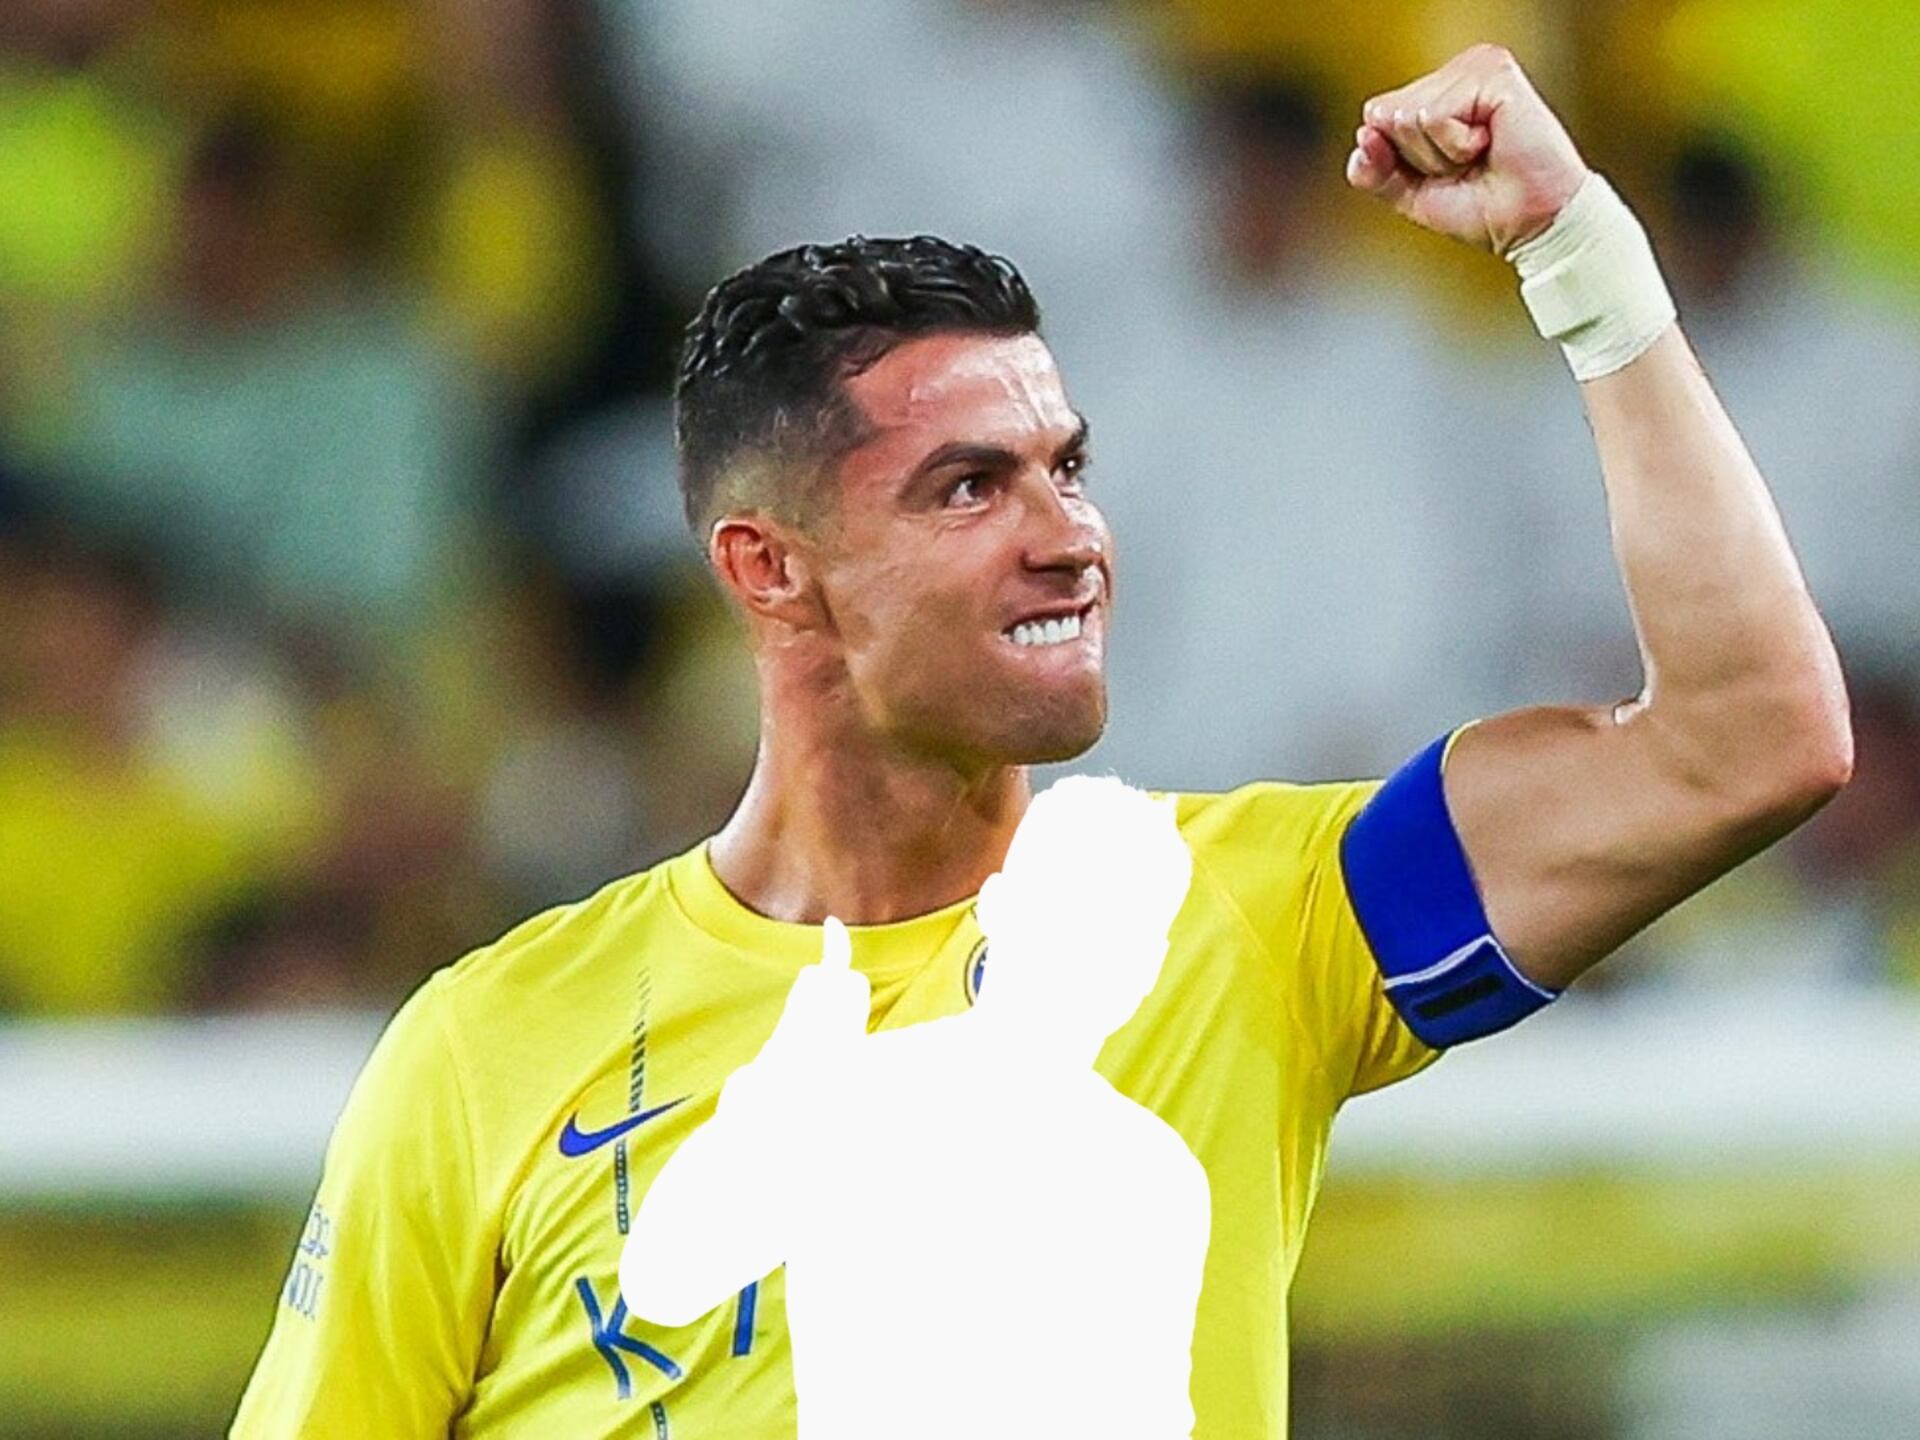 Cristiano's request to stay at Al Nassr, the teammate with whom he'd shared a dressing room & wants to bring to Saudi